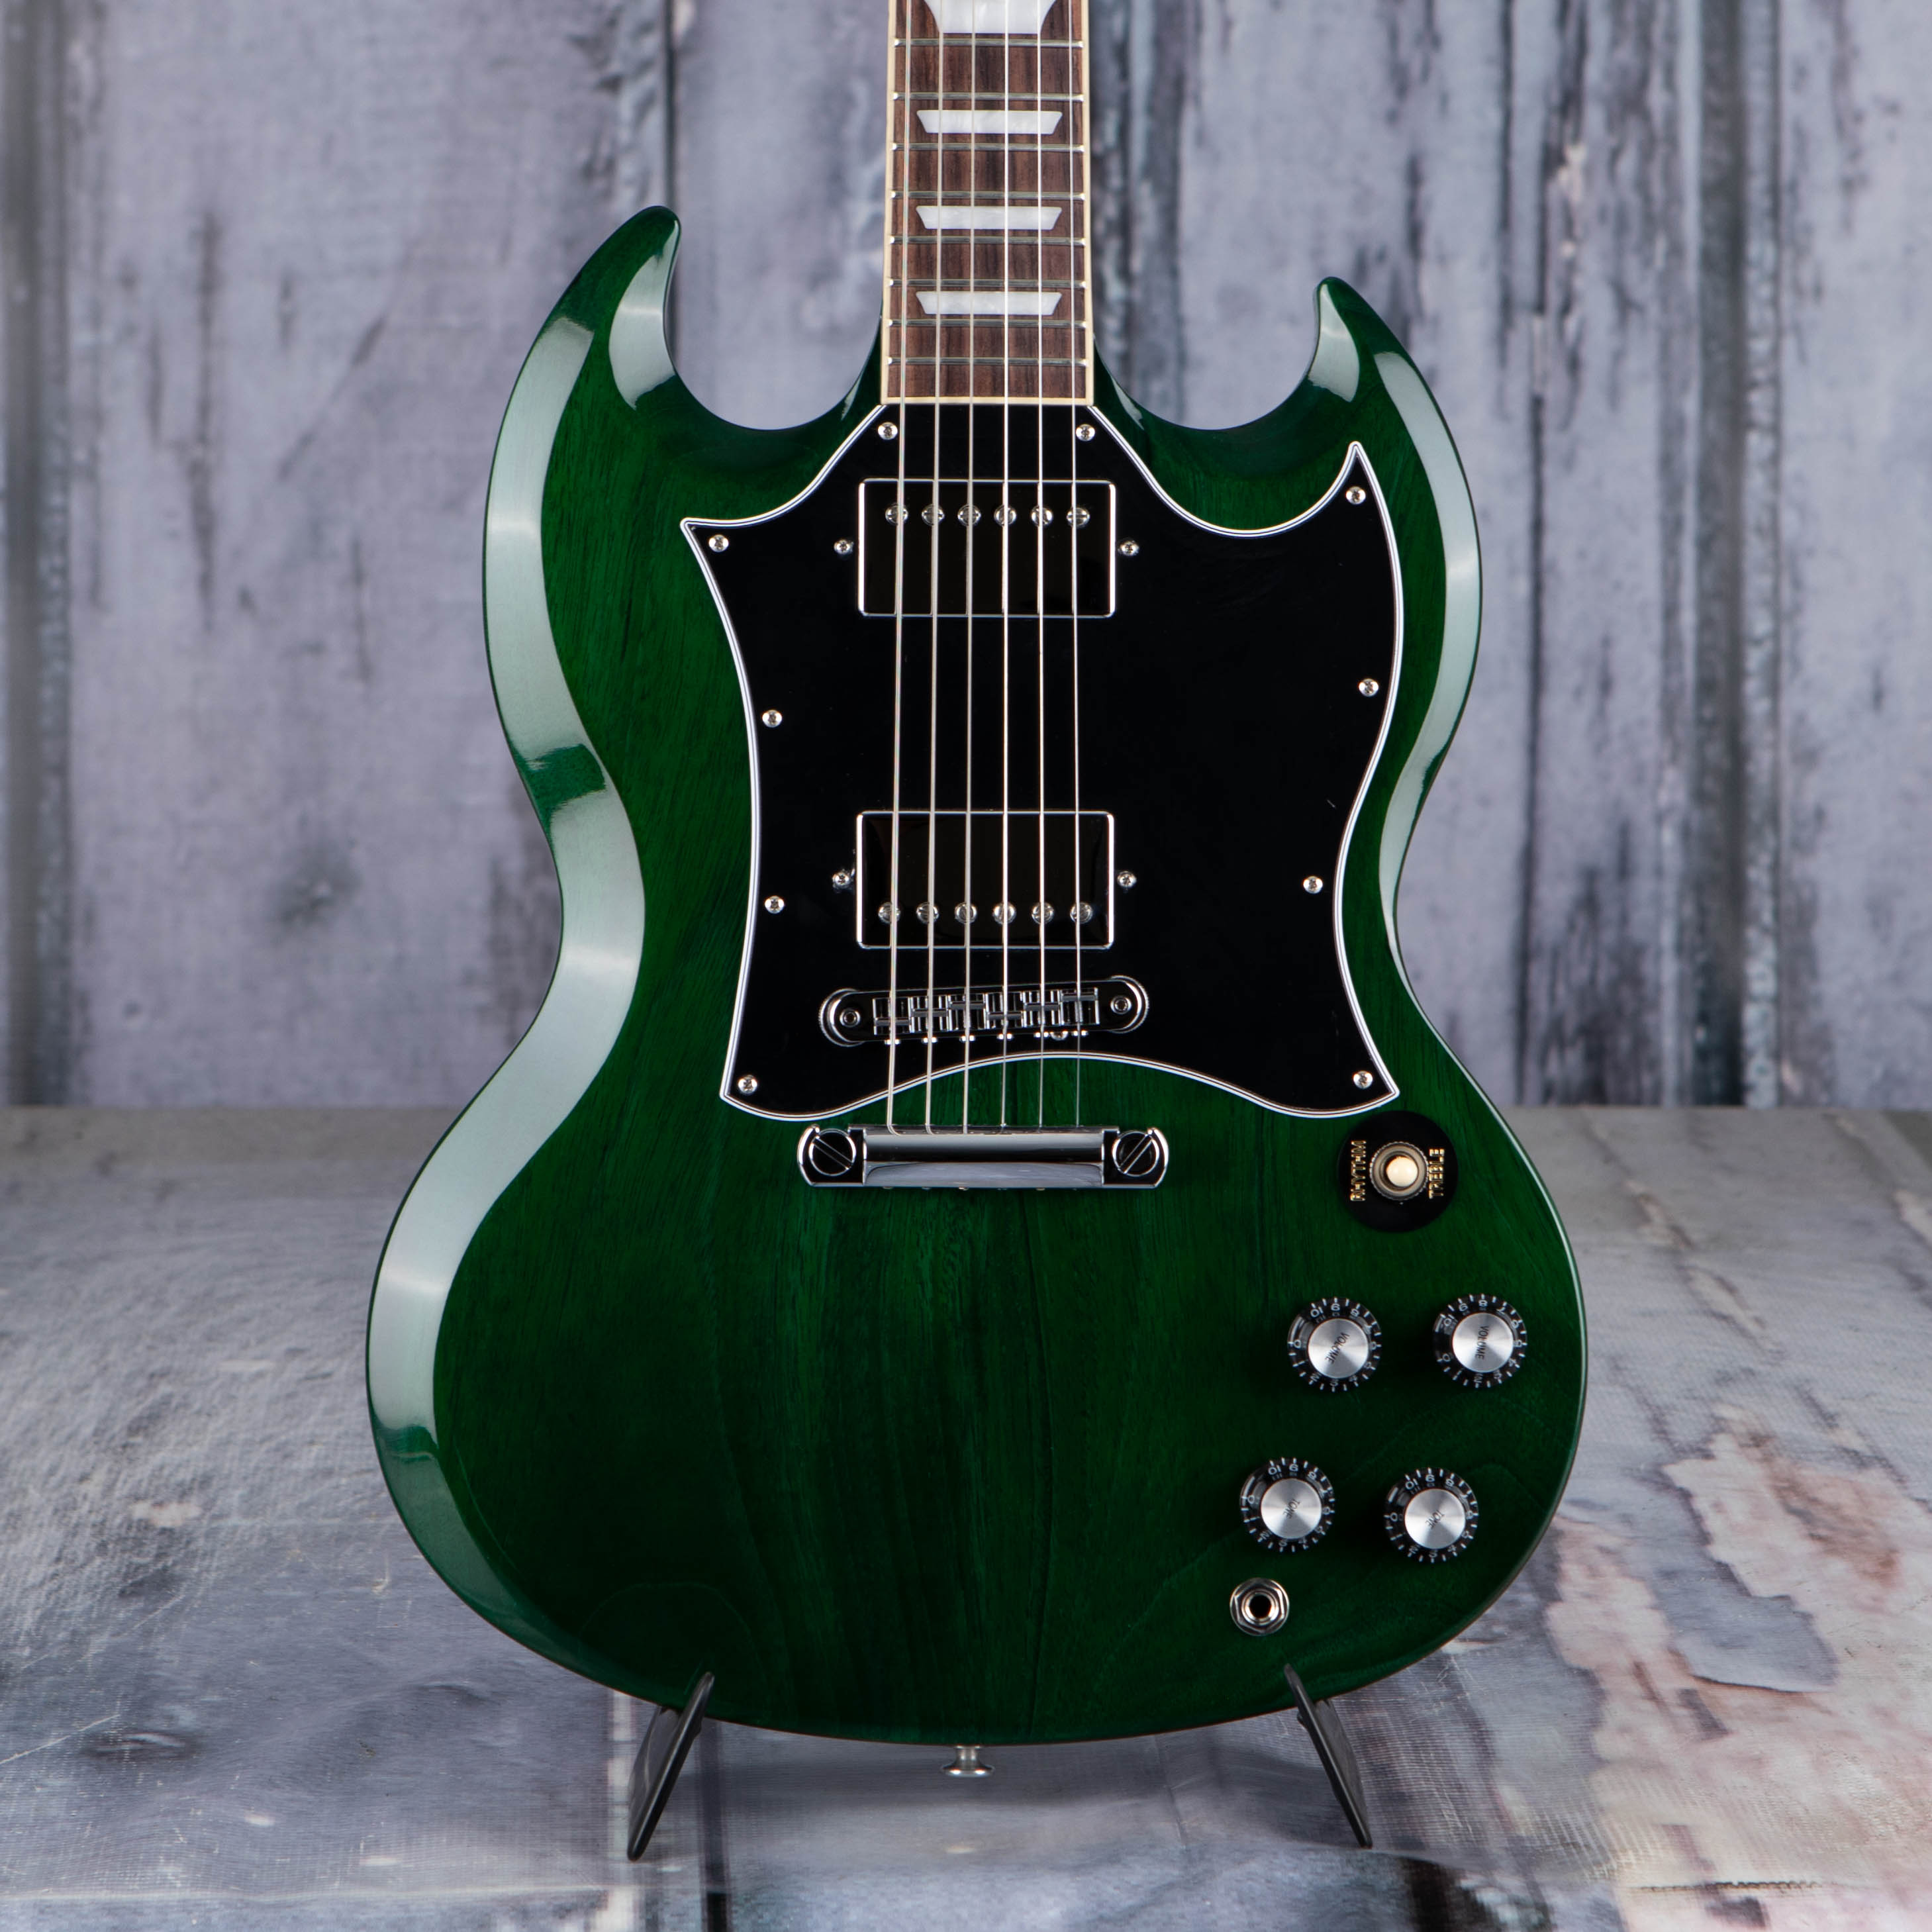 Gibson USA SG Standard, Translucent Teal | For Sale | Replay 